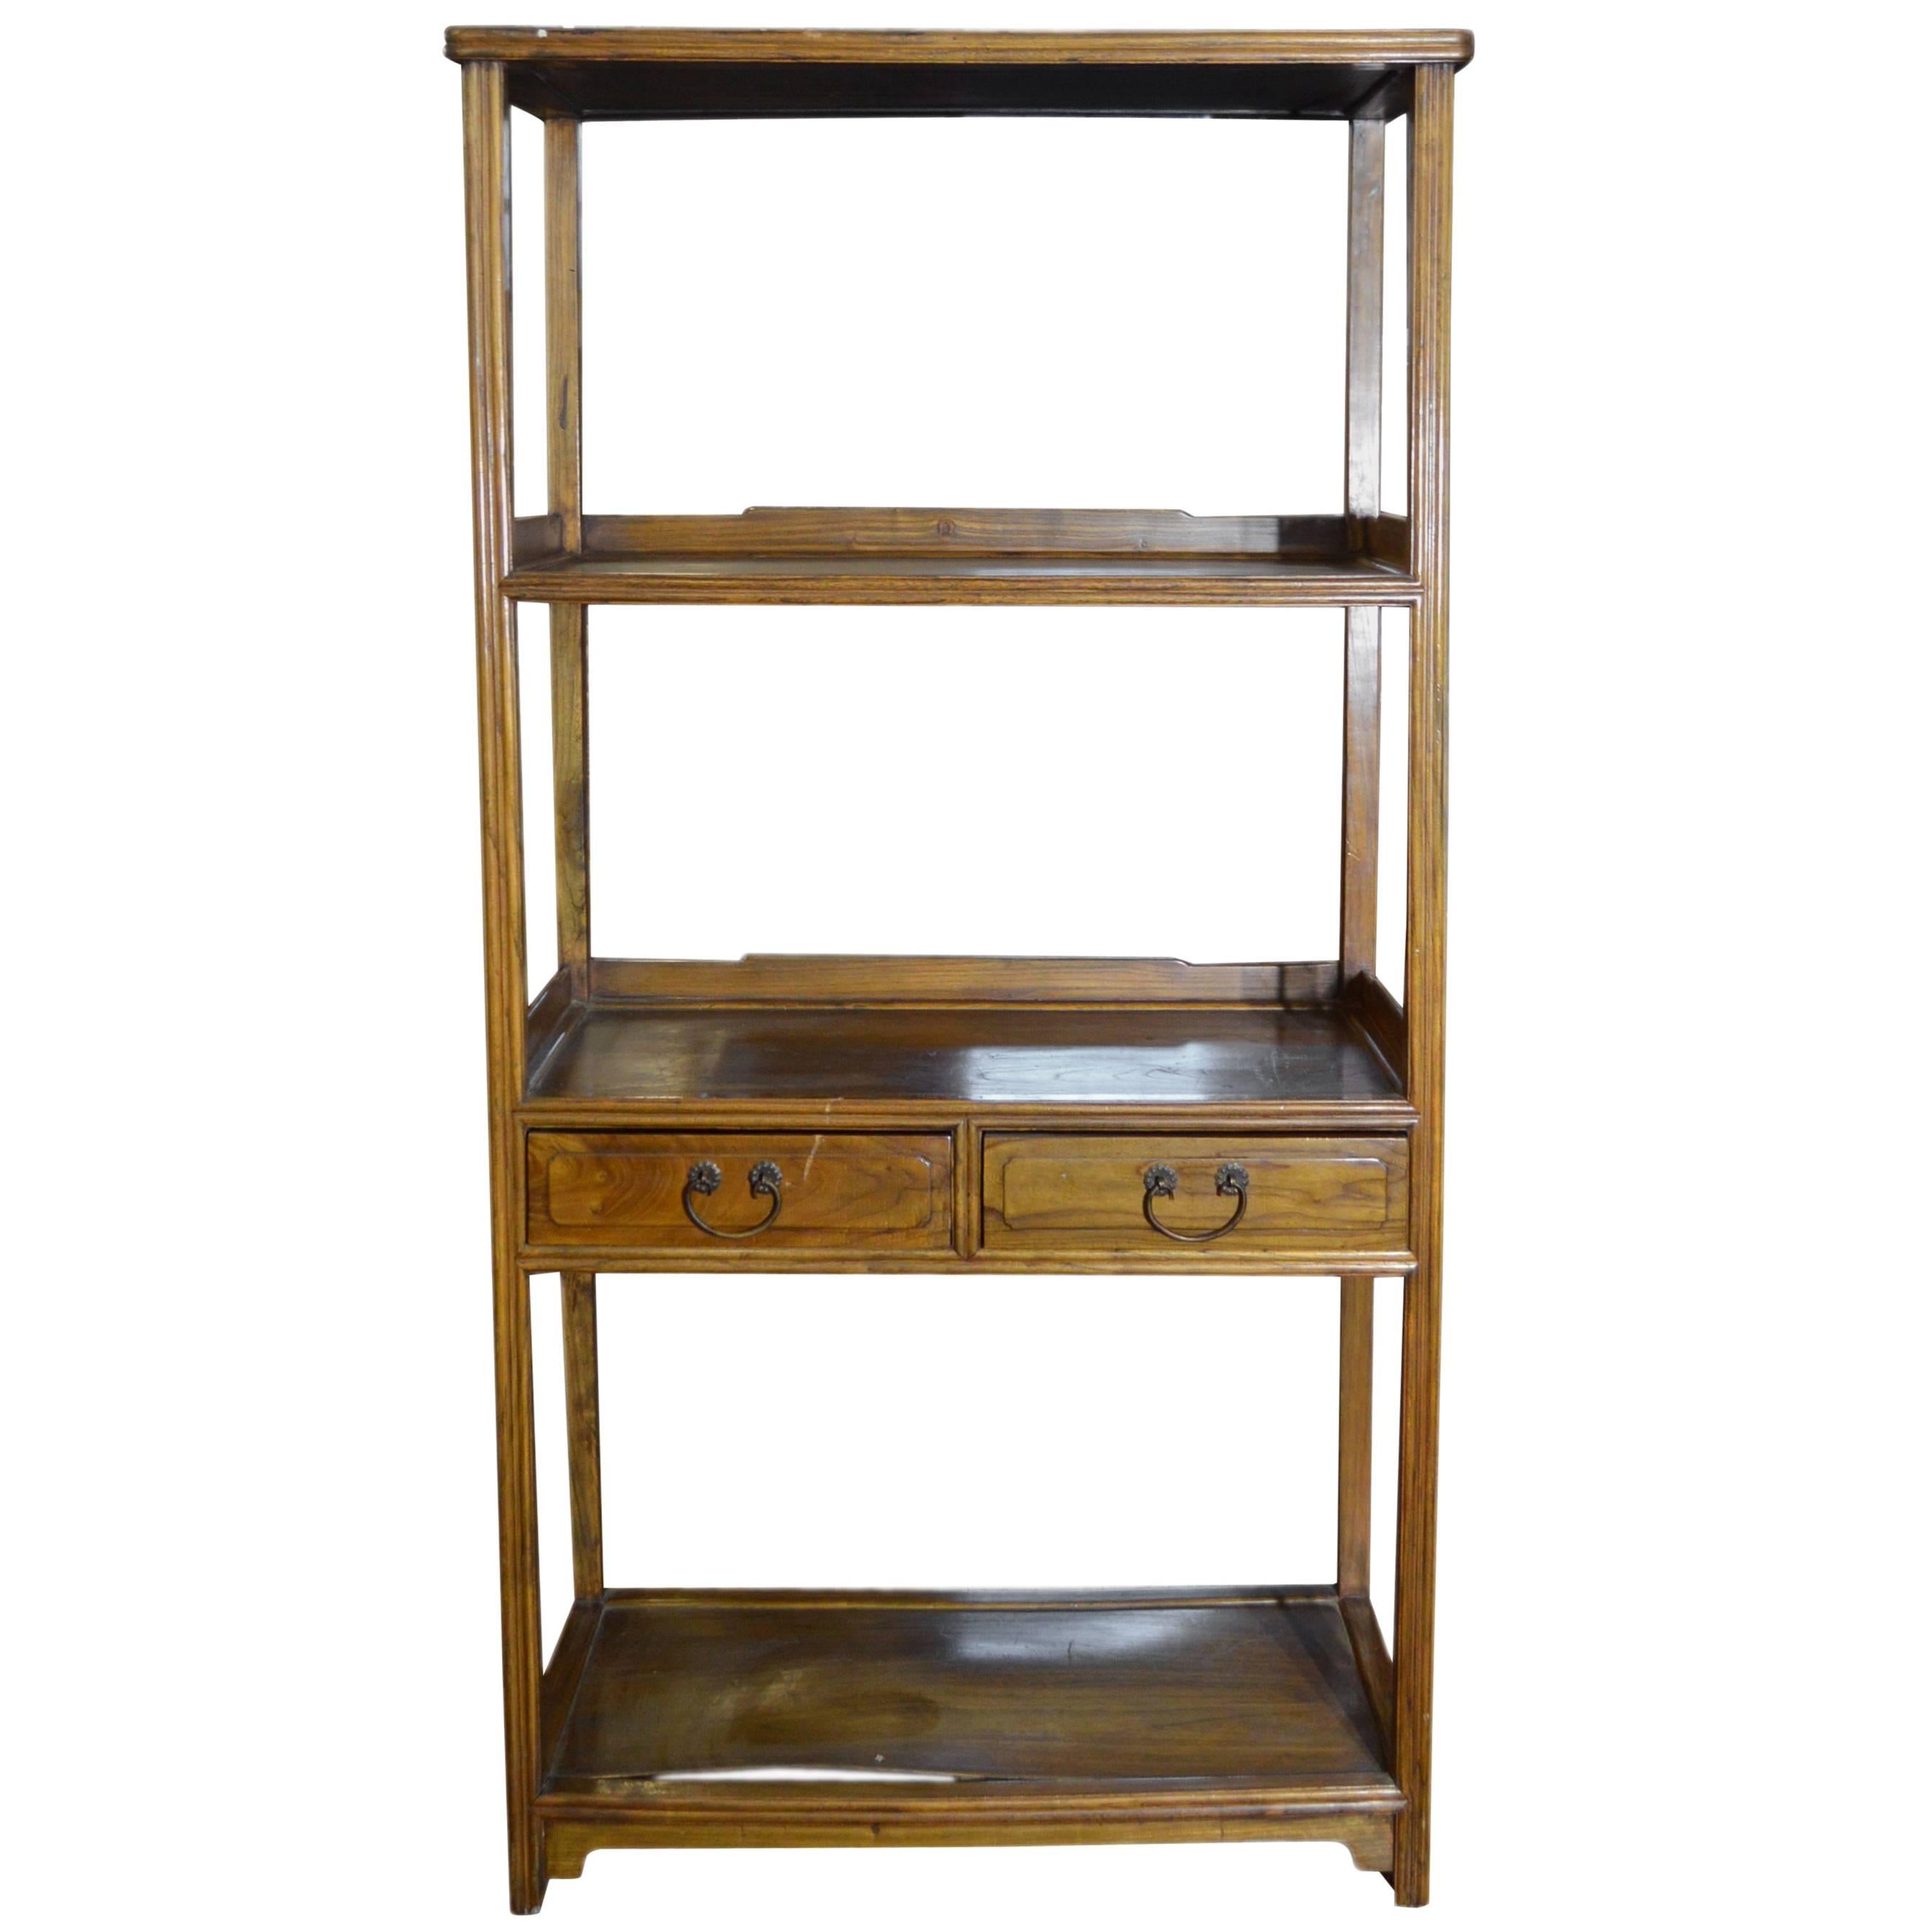 Vintage Classic Design Early 20th Century Chinese Wooden Bookshelf with Drawers 